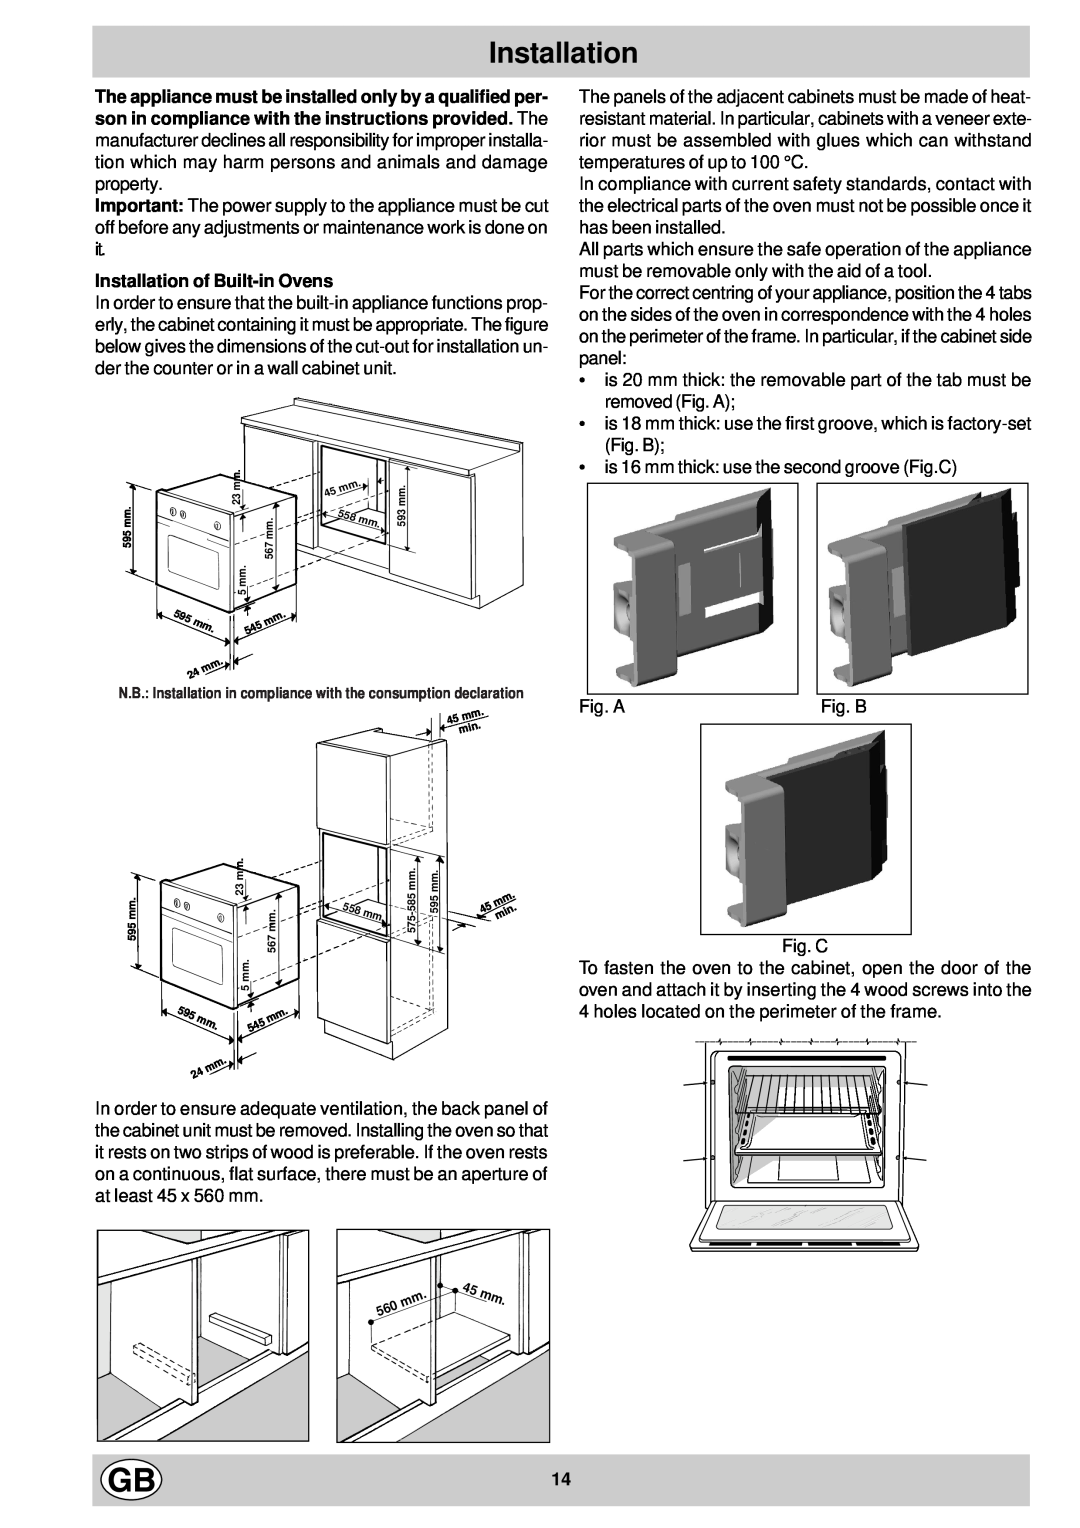 Creda S077E manual Installation of Built-in Ovens 